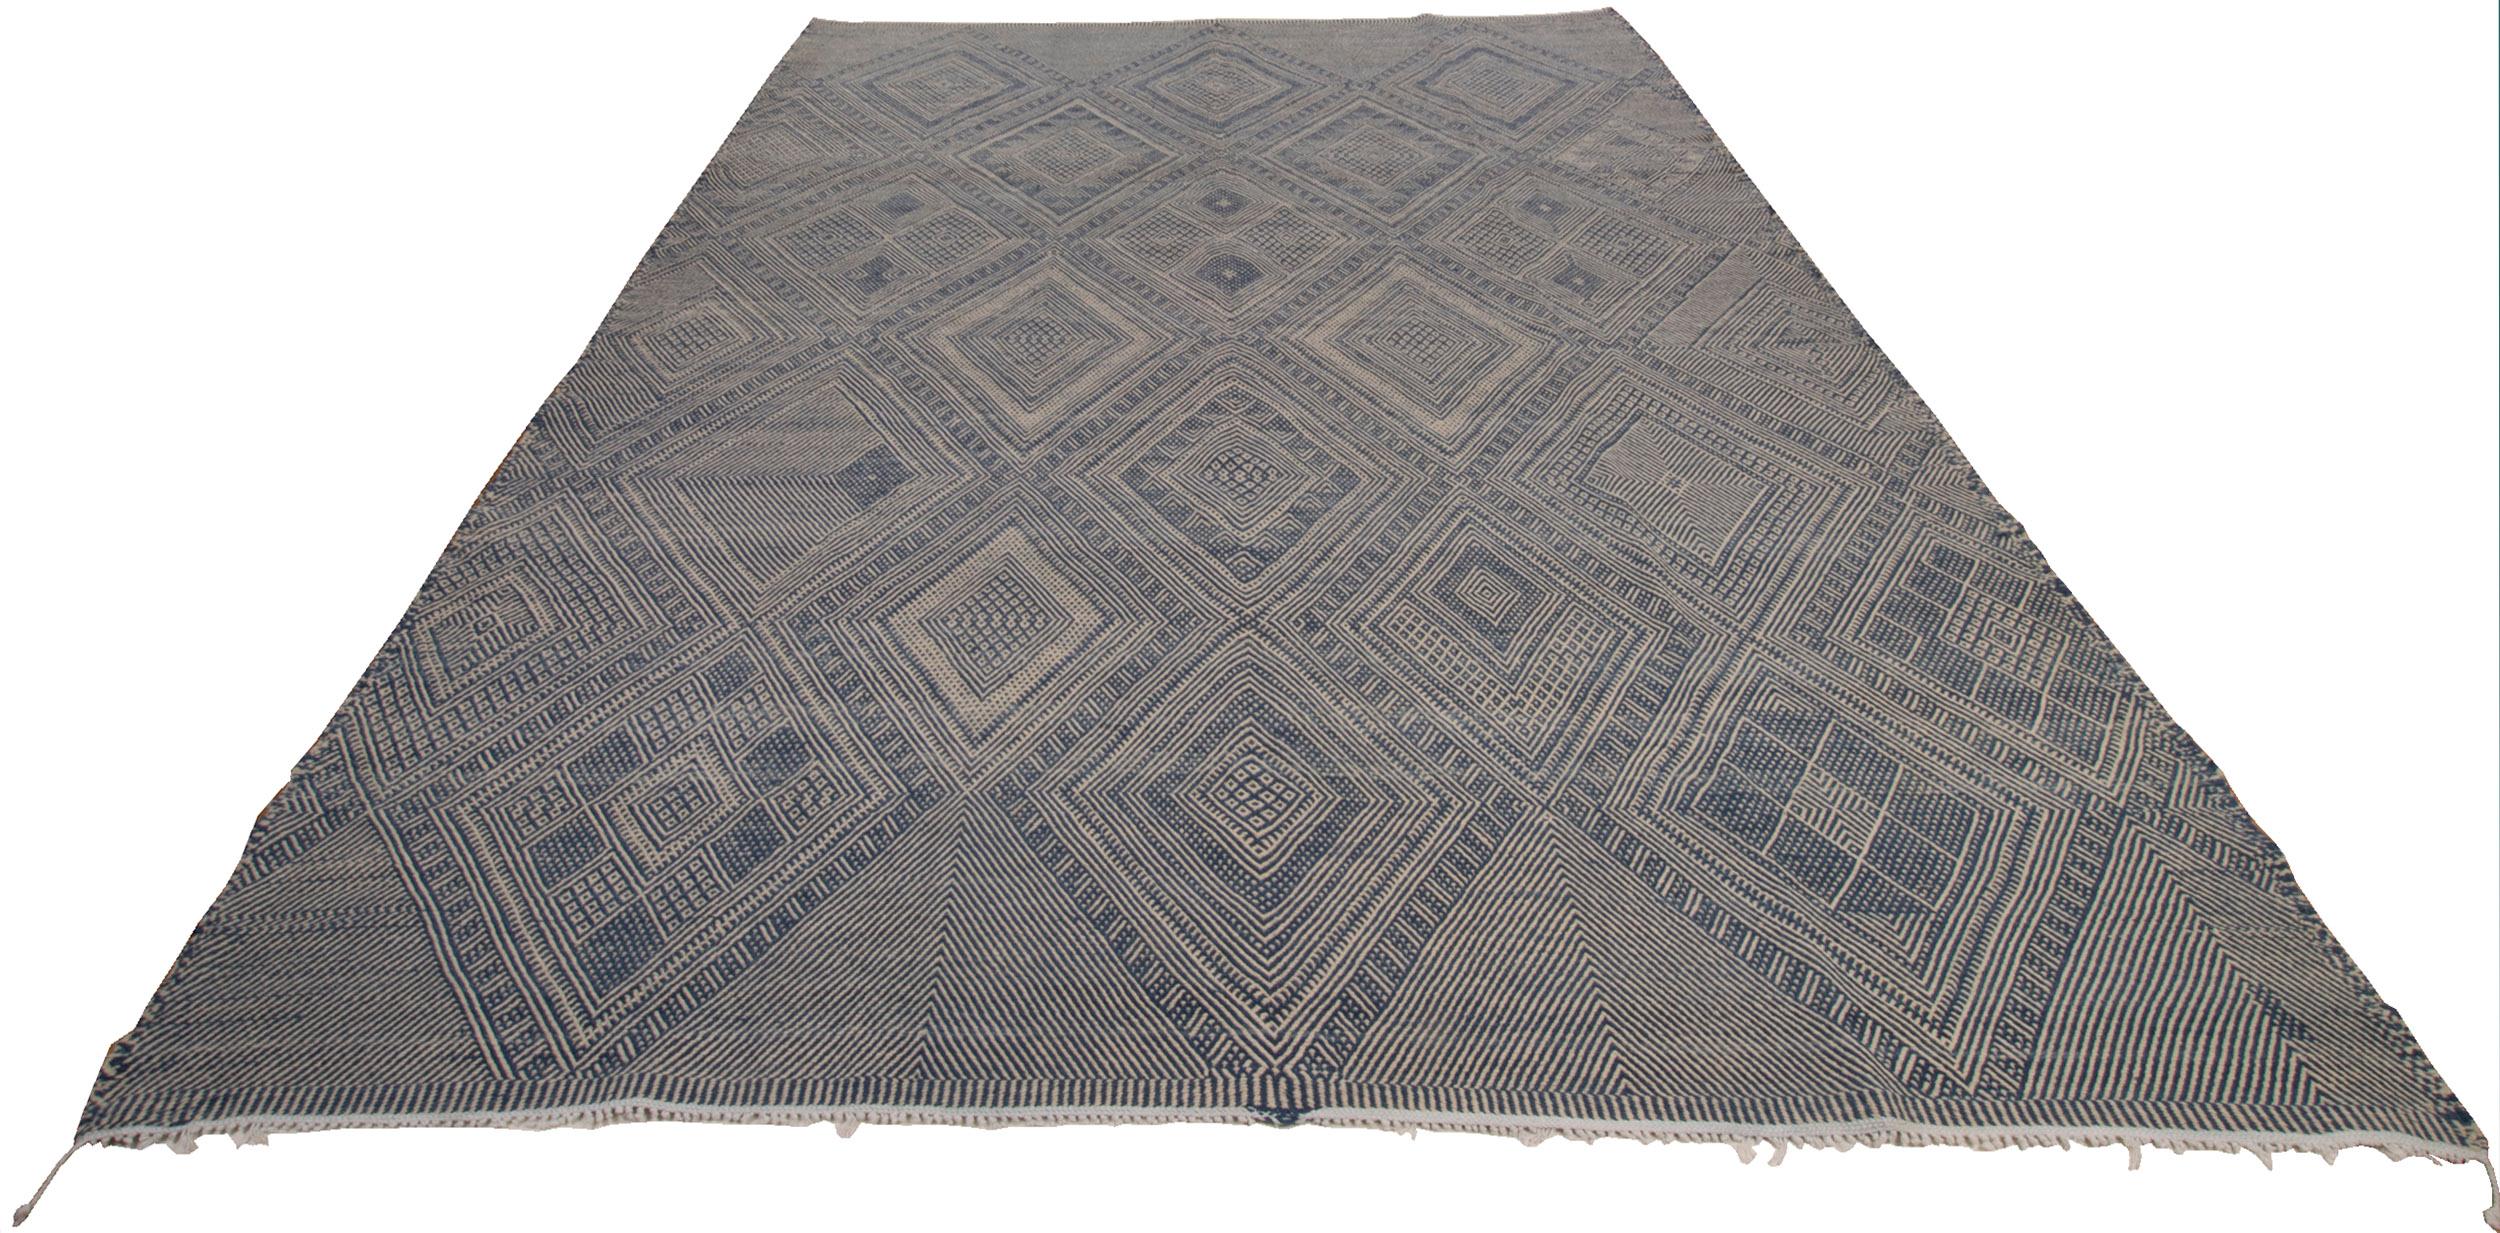 The Moroccan Berber rugs are handmade in the Atlas mountains by members of the local tribes using the highest quality wool and techniques.
This bespoke Berber rug is timeless and bridges the gap between modern and tribal design.
Dimensions: Length